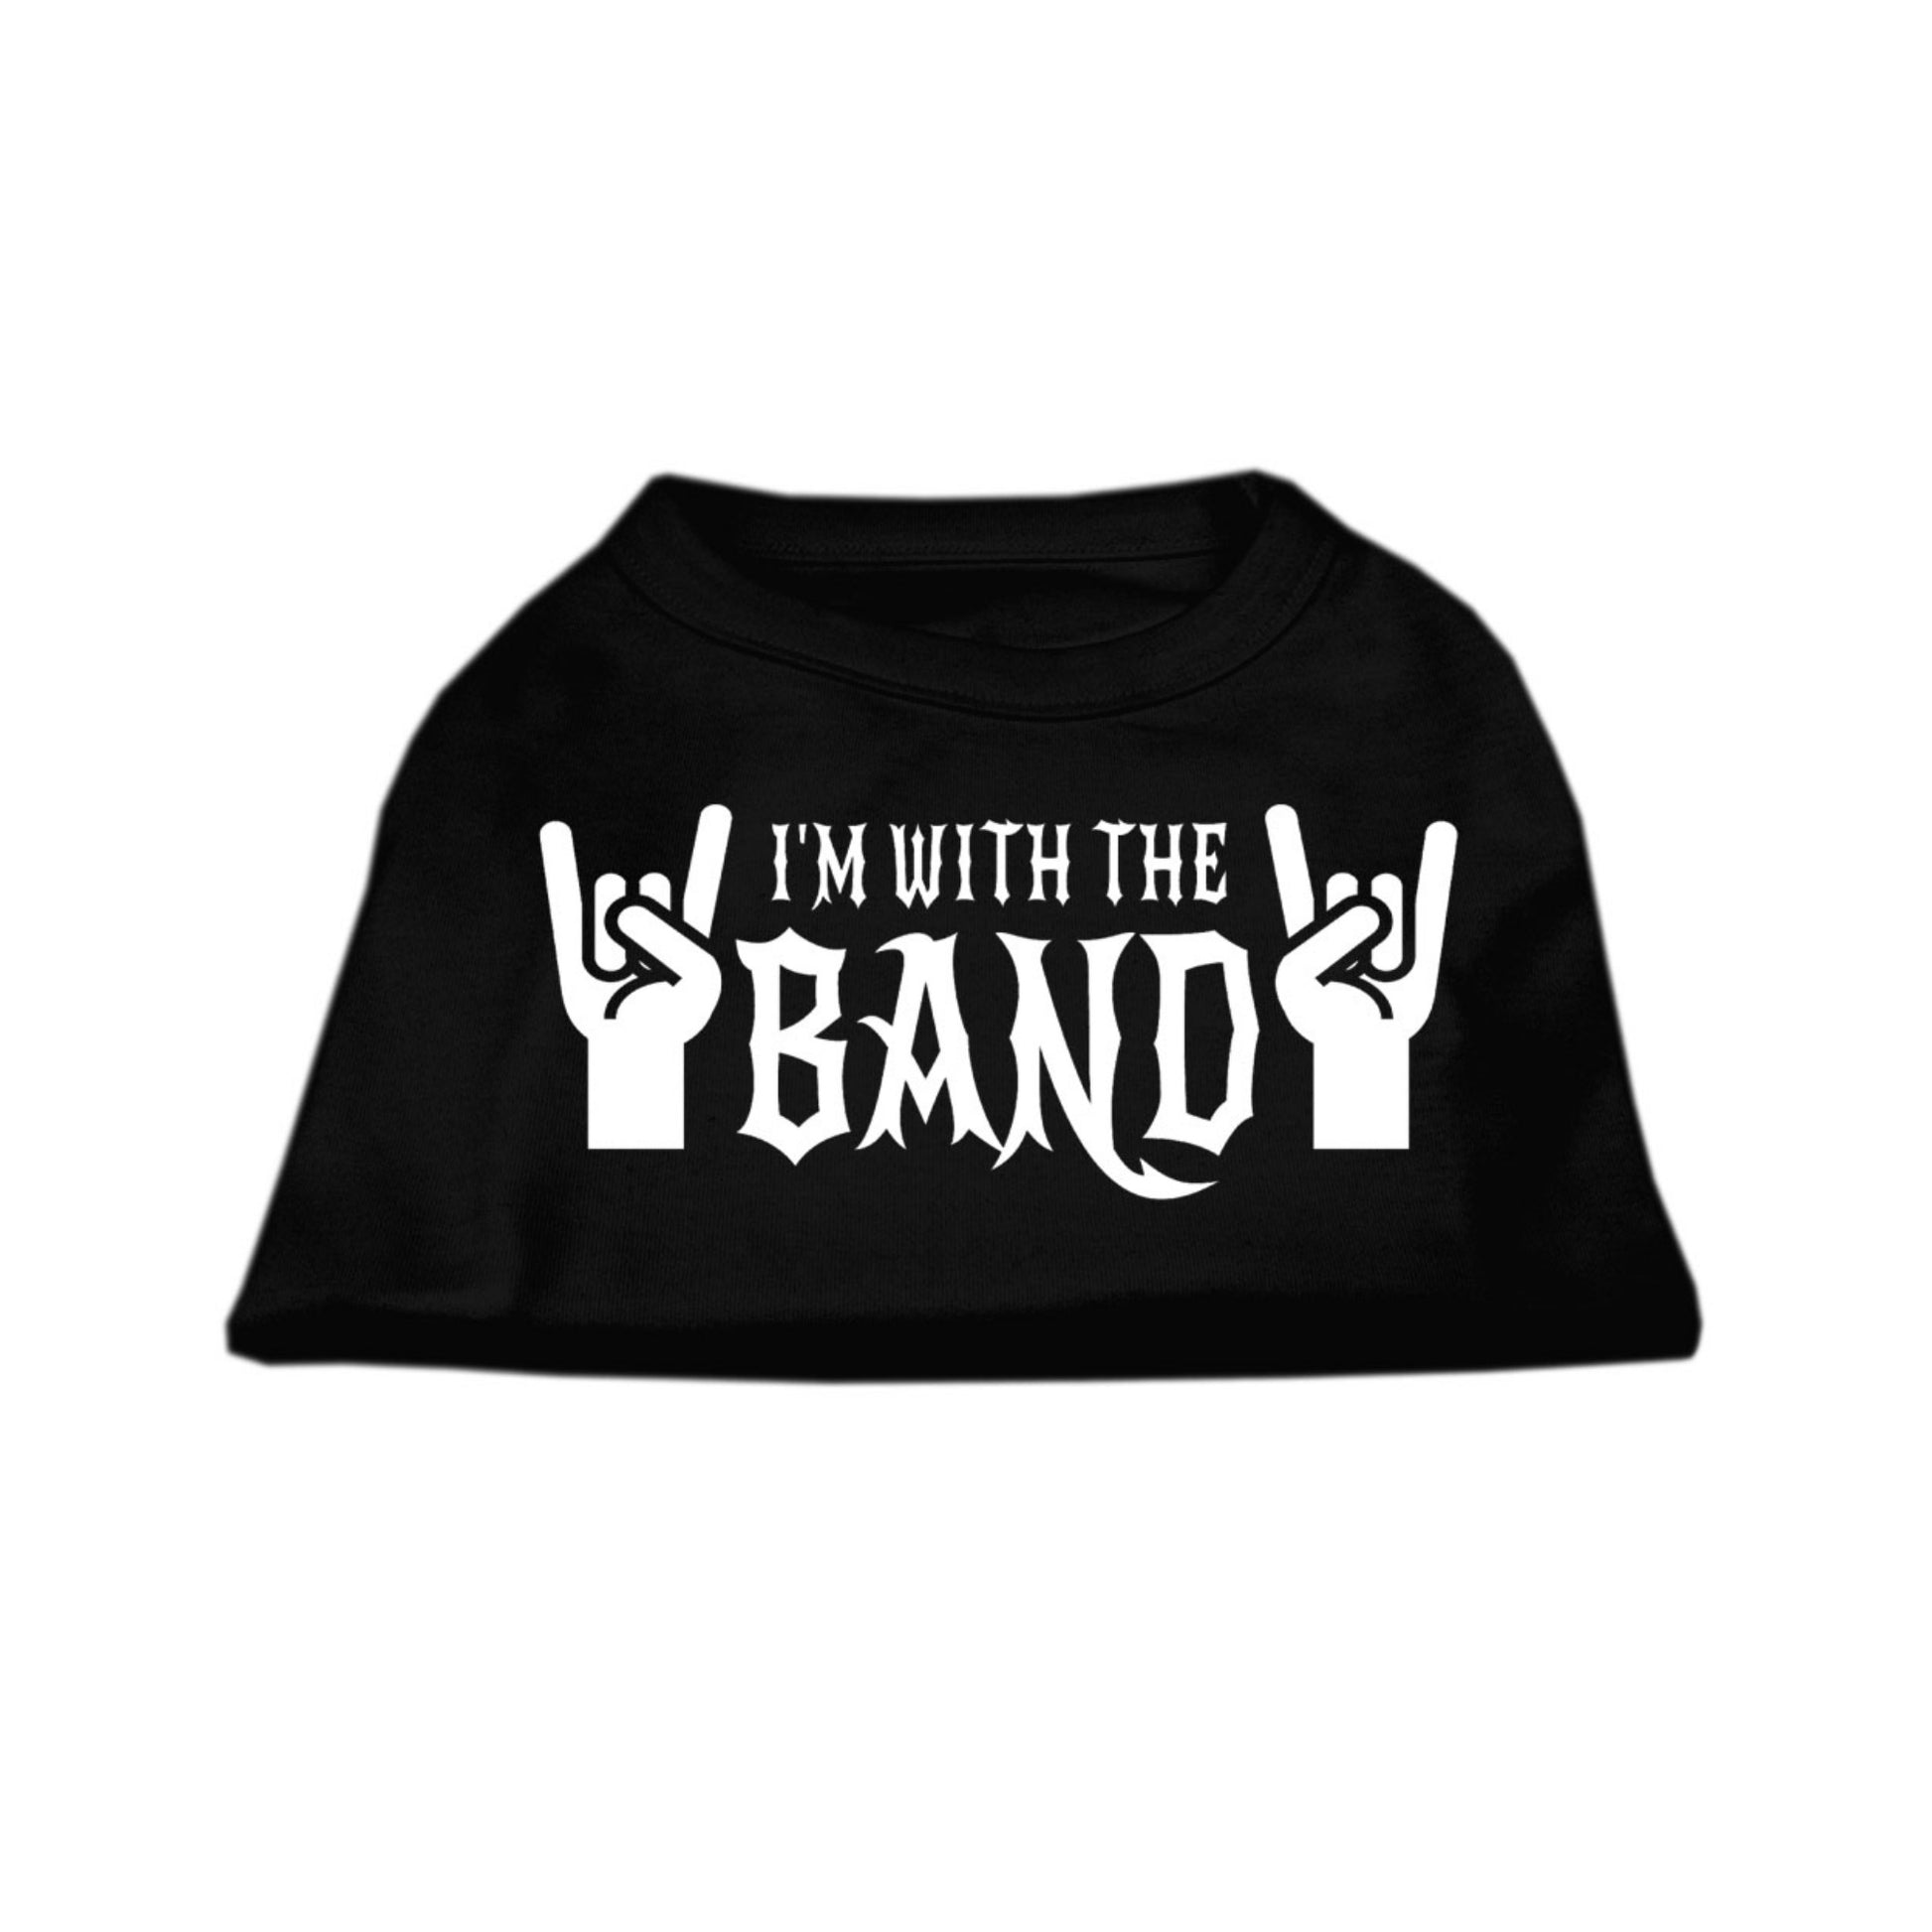 I'm With The Band Pet Shirt Black